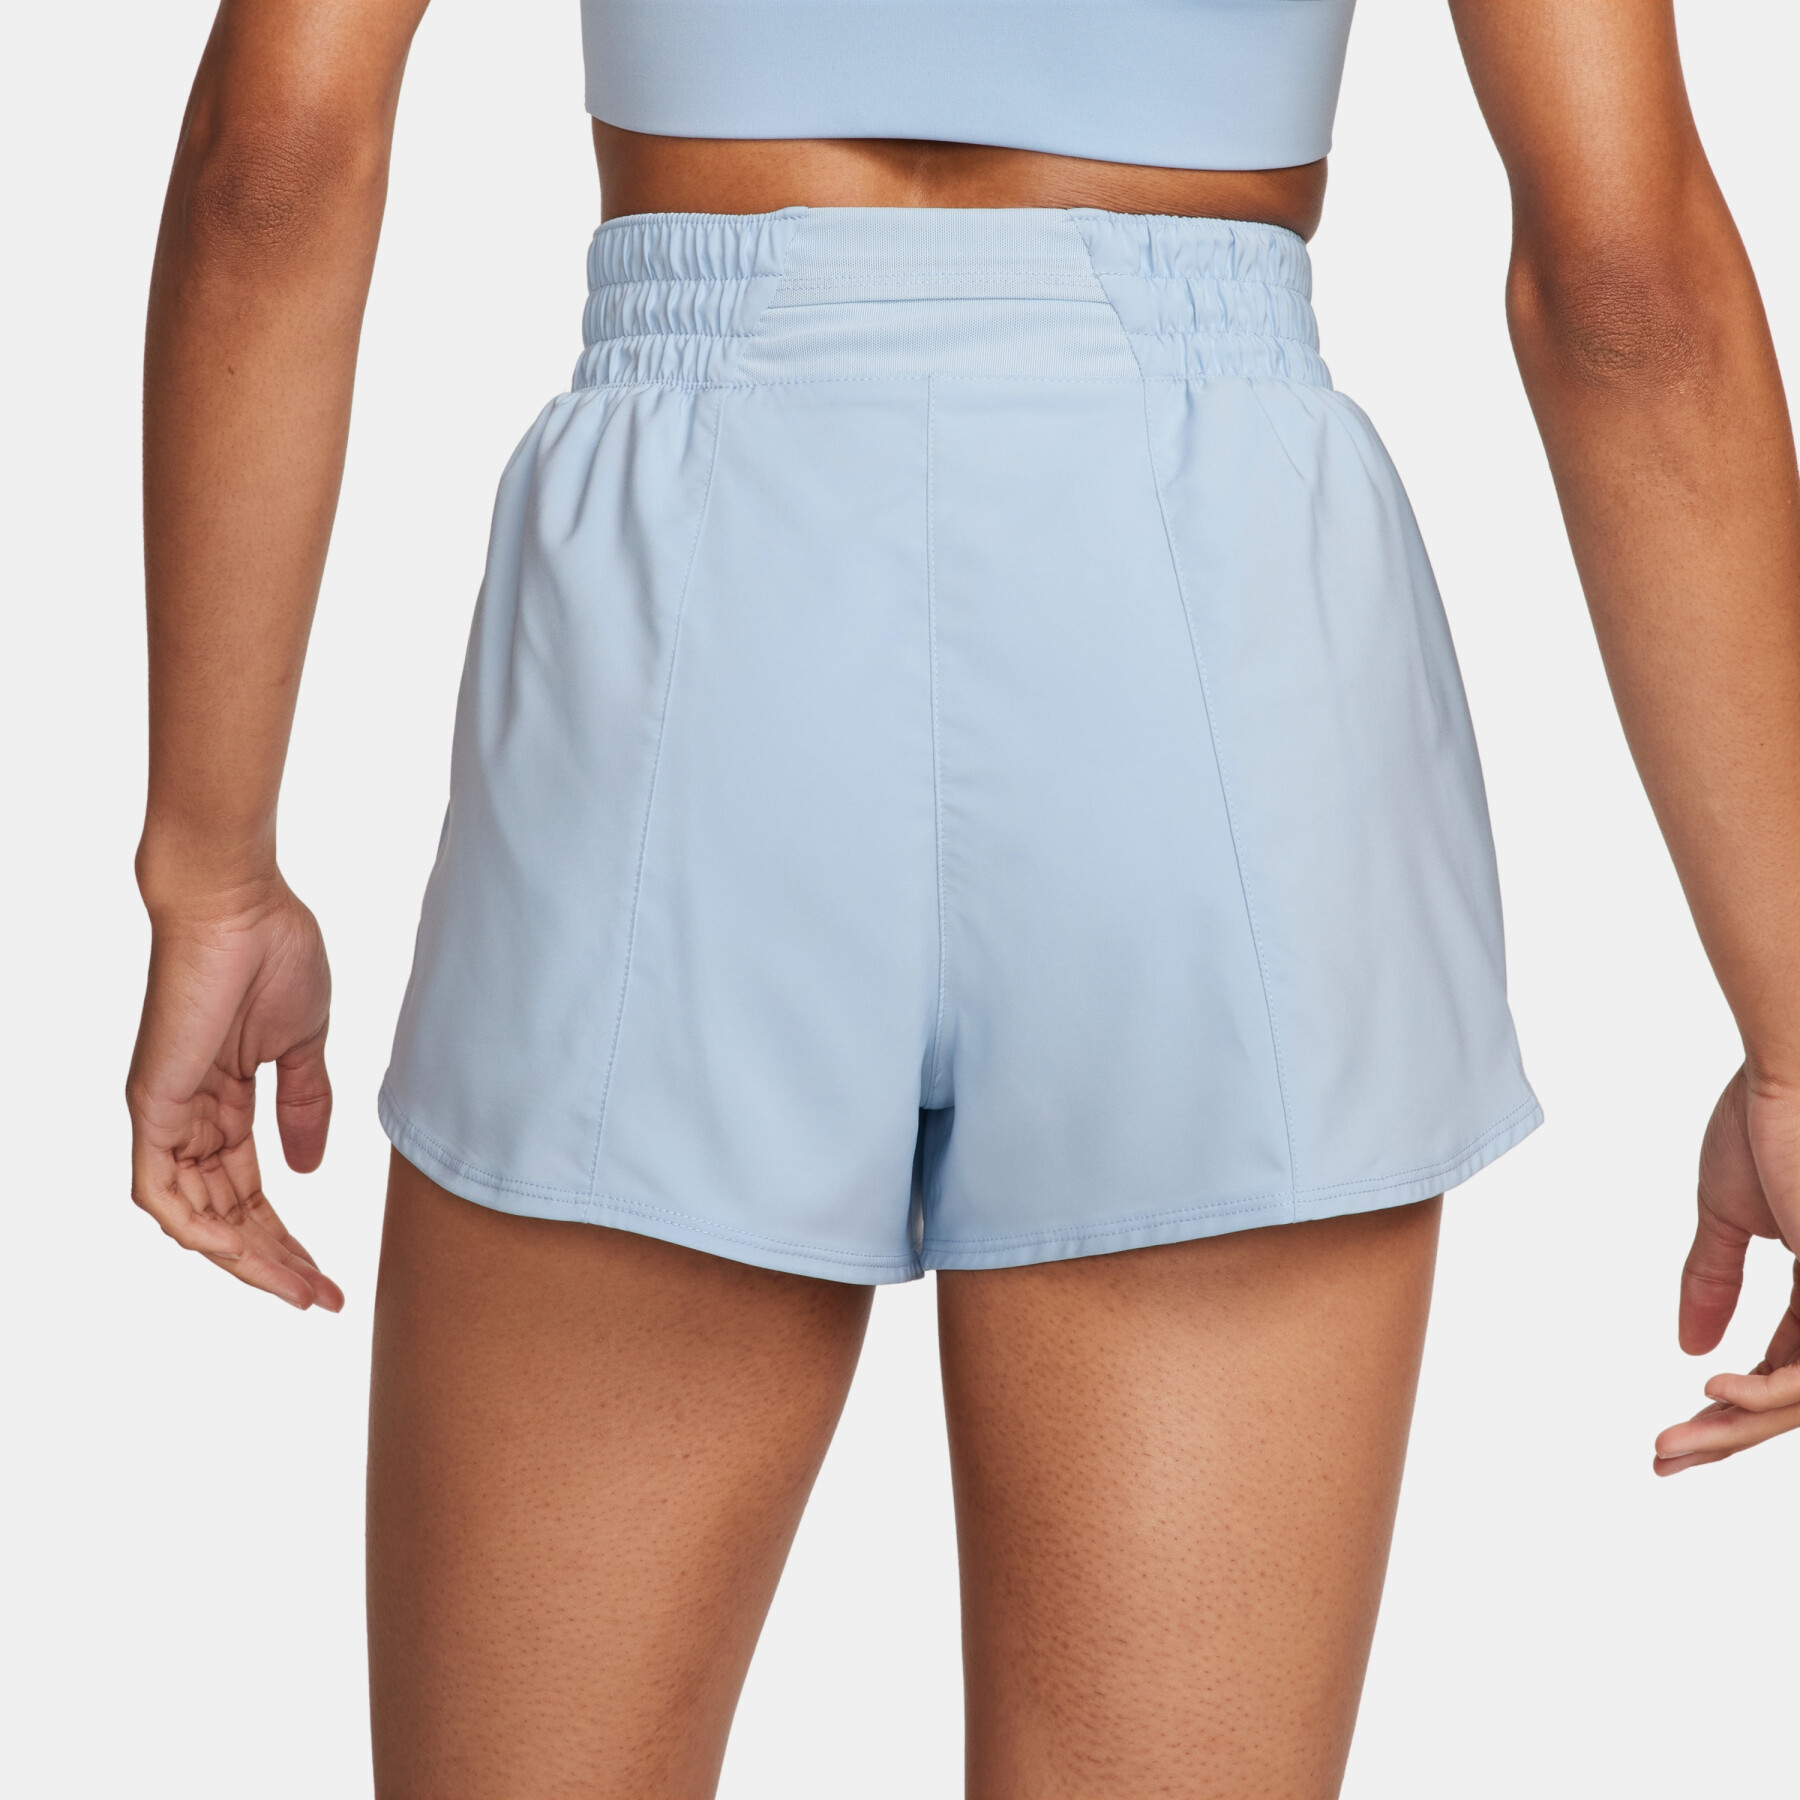 Women's high-waisted shorts with integrated undershort Nike One Dri-FIT